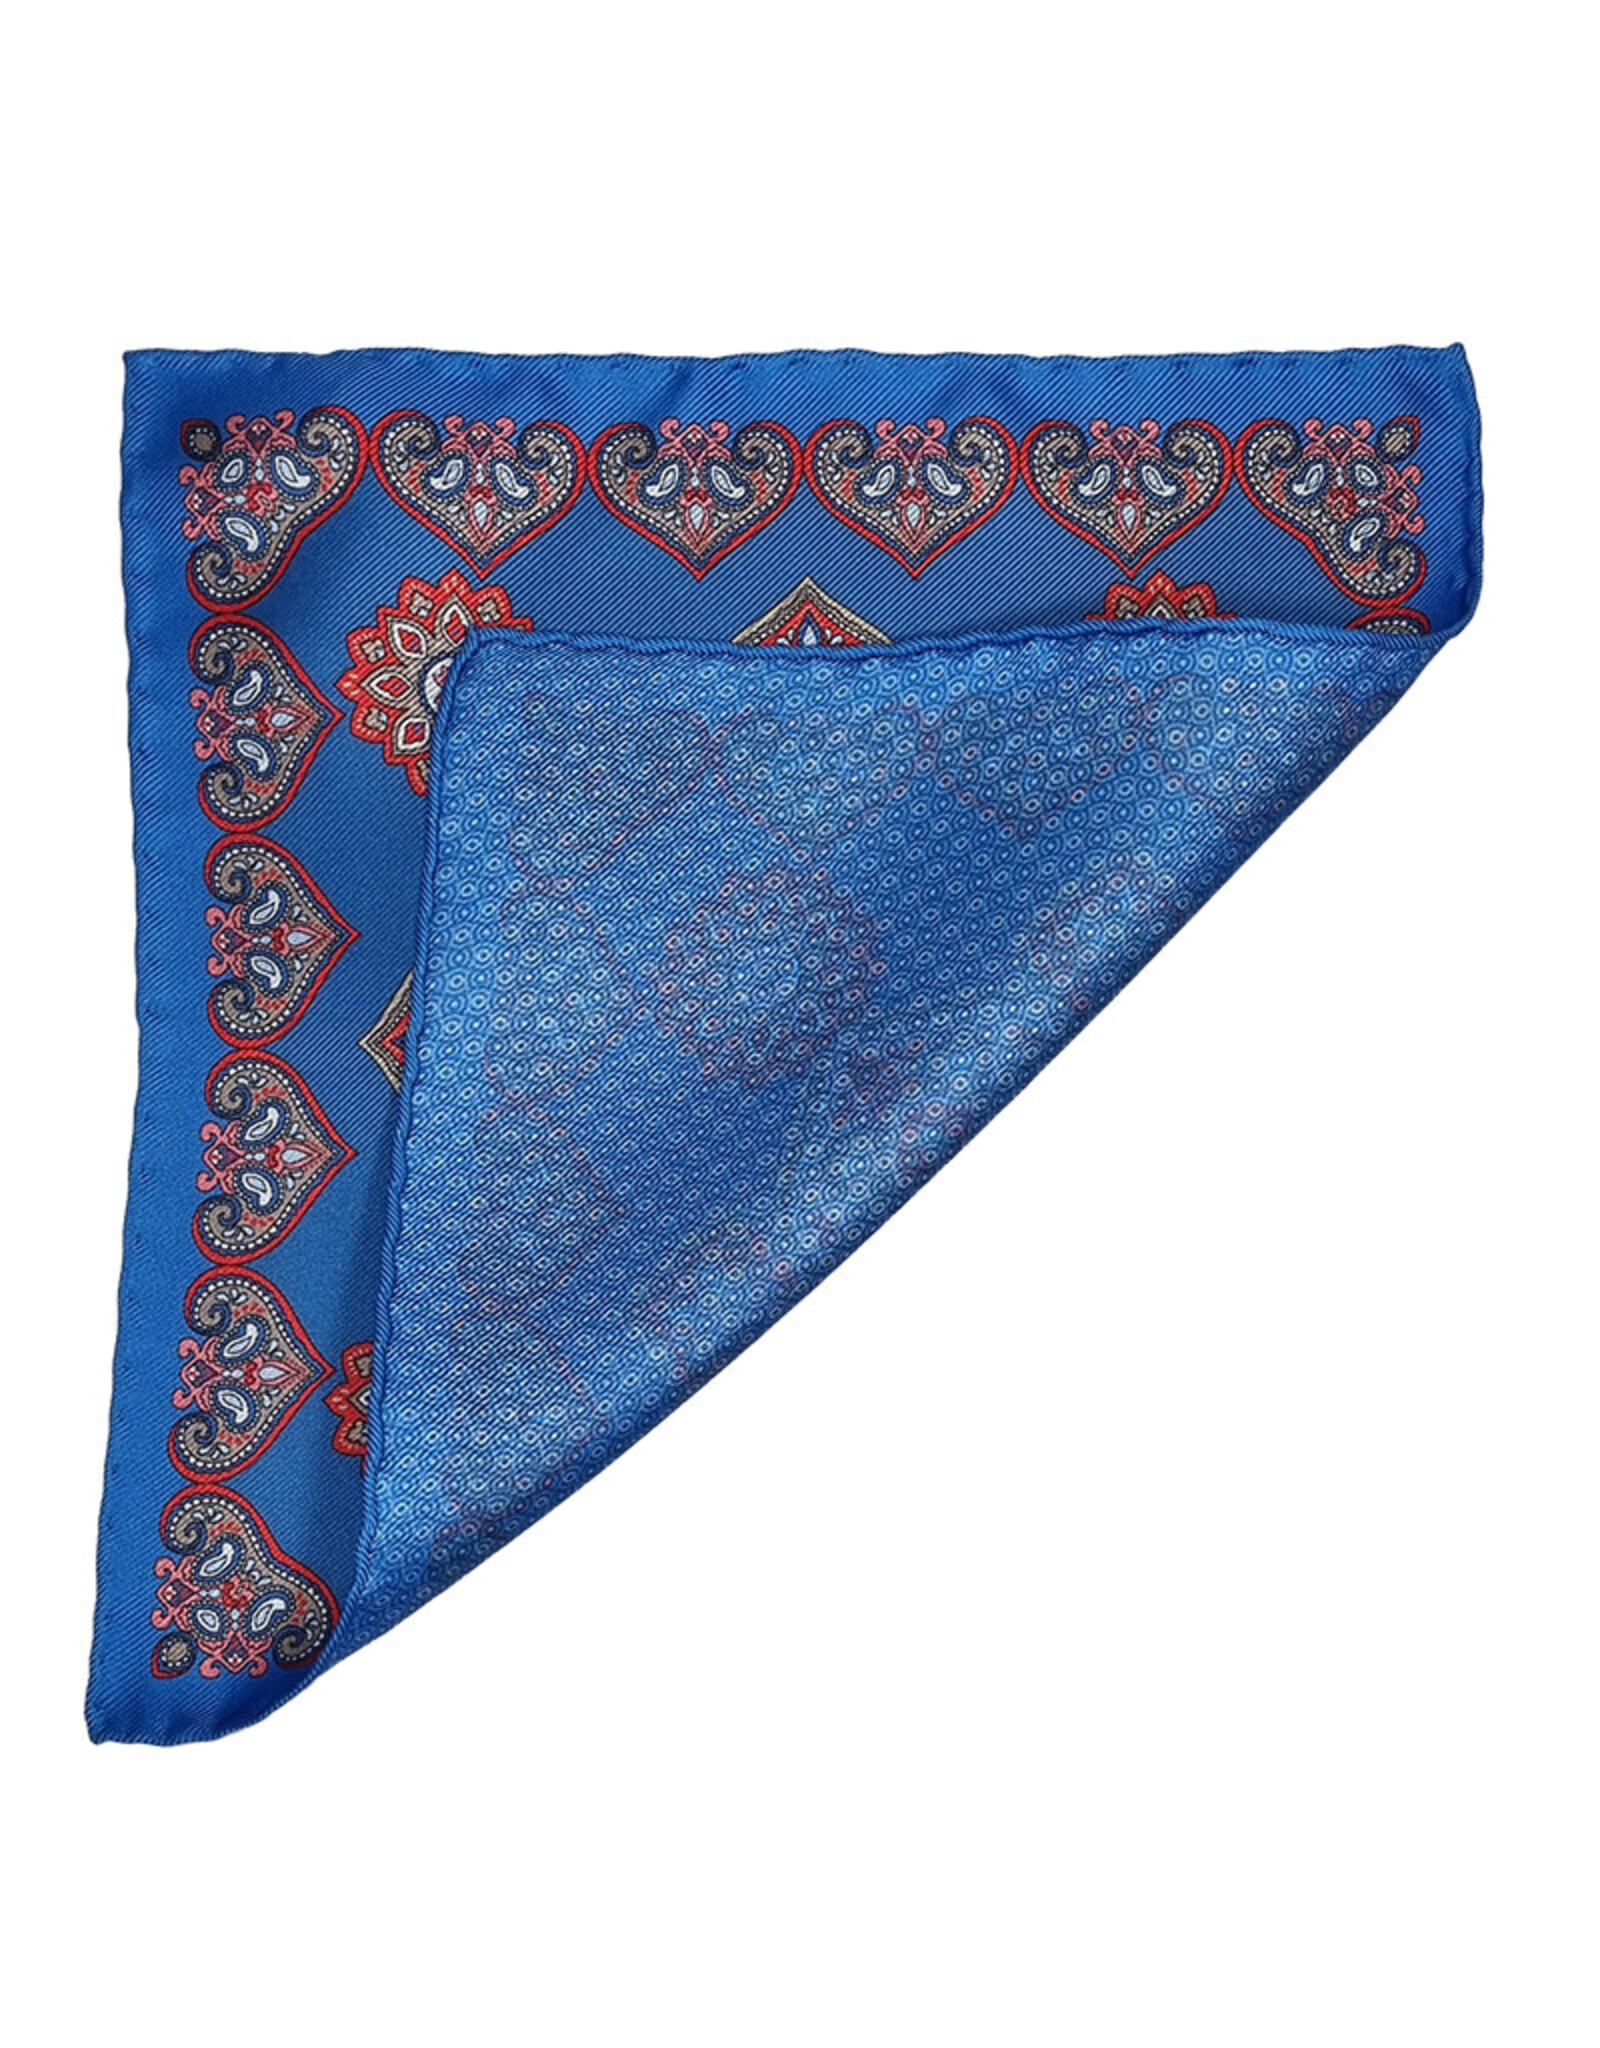 Calabrese Calabrese pocket square light blue - red 4724002/002